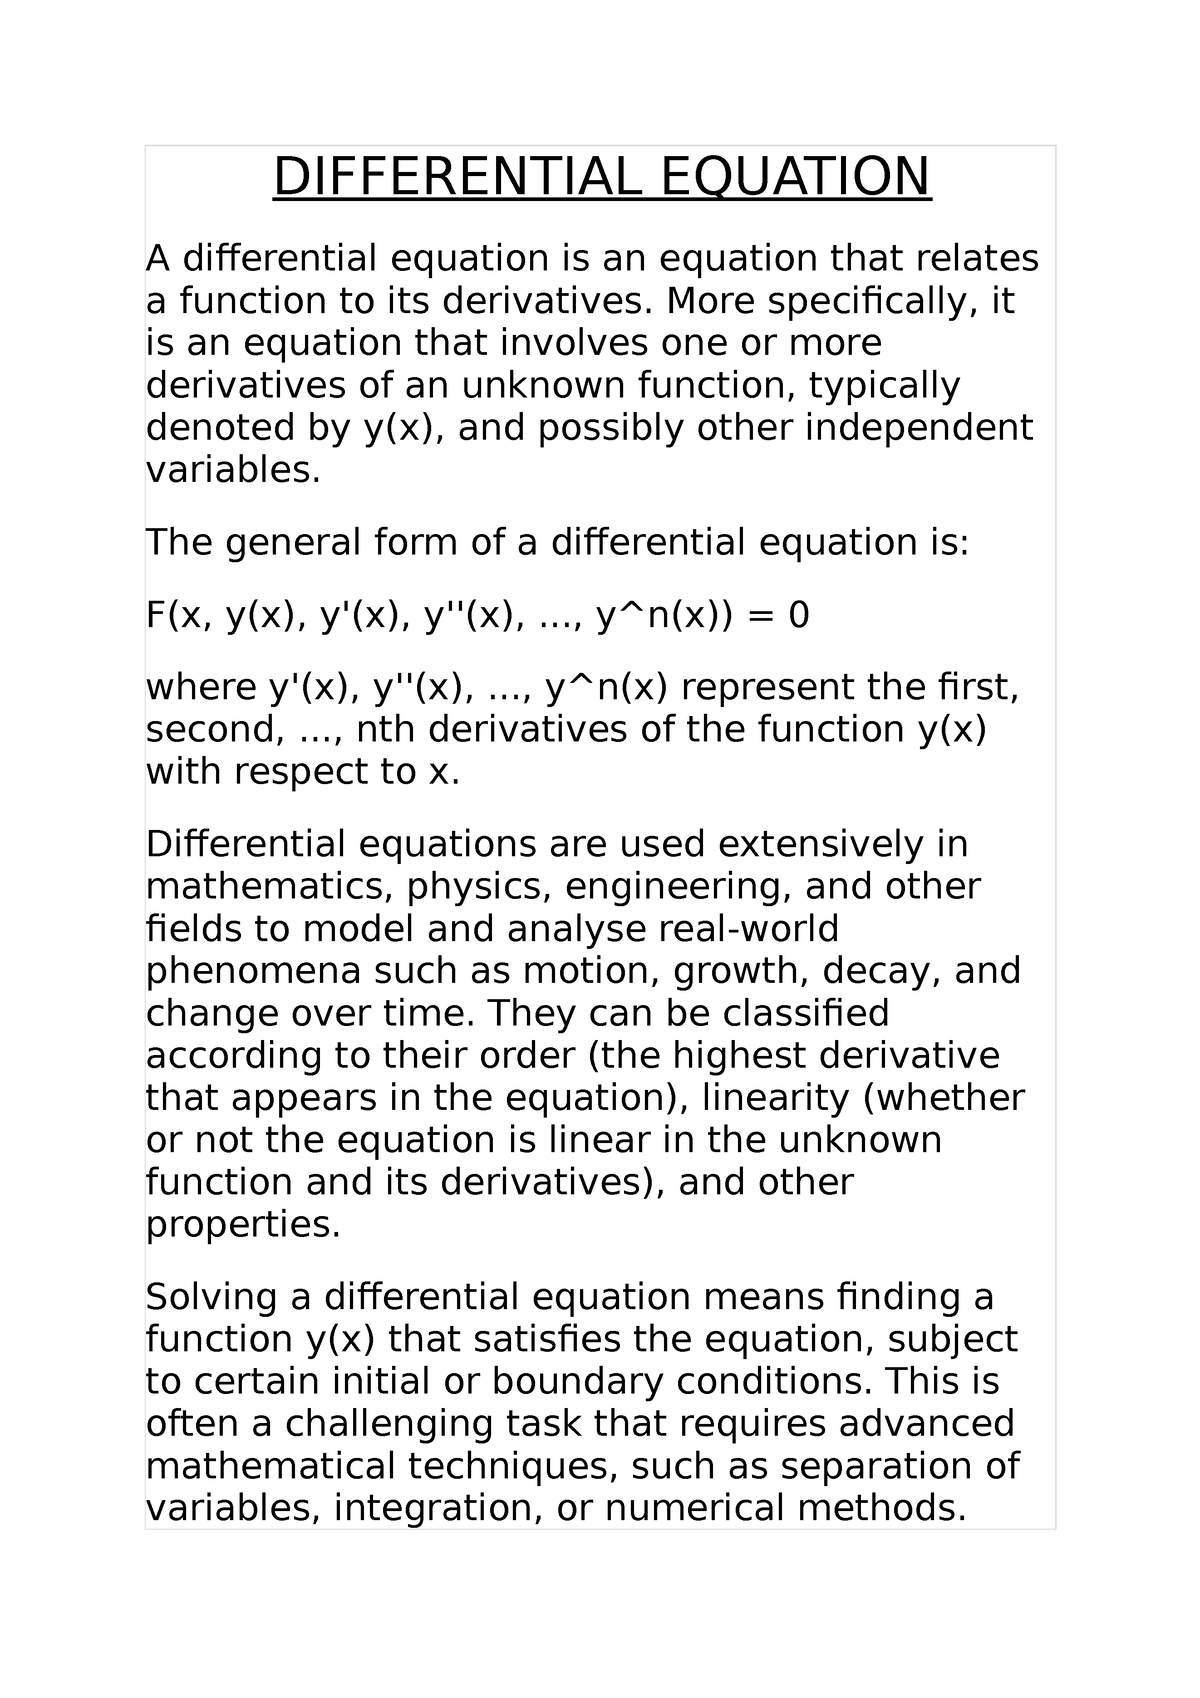 difference equations thesis